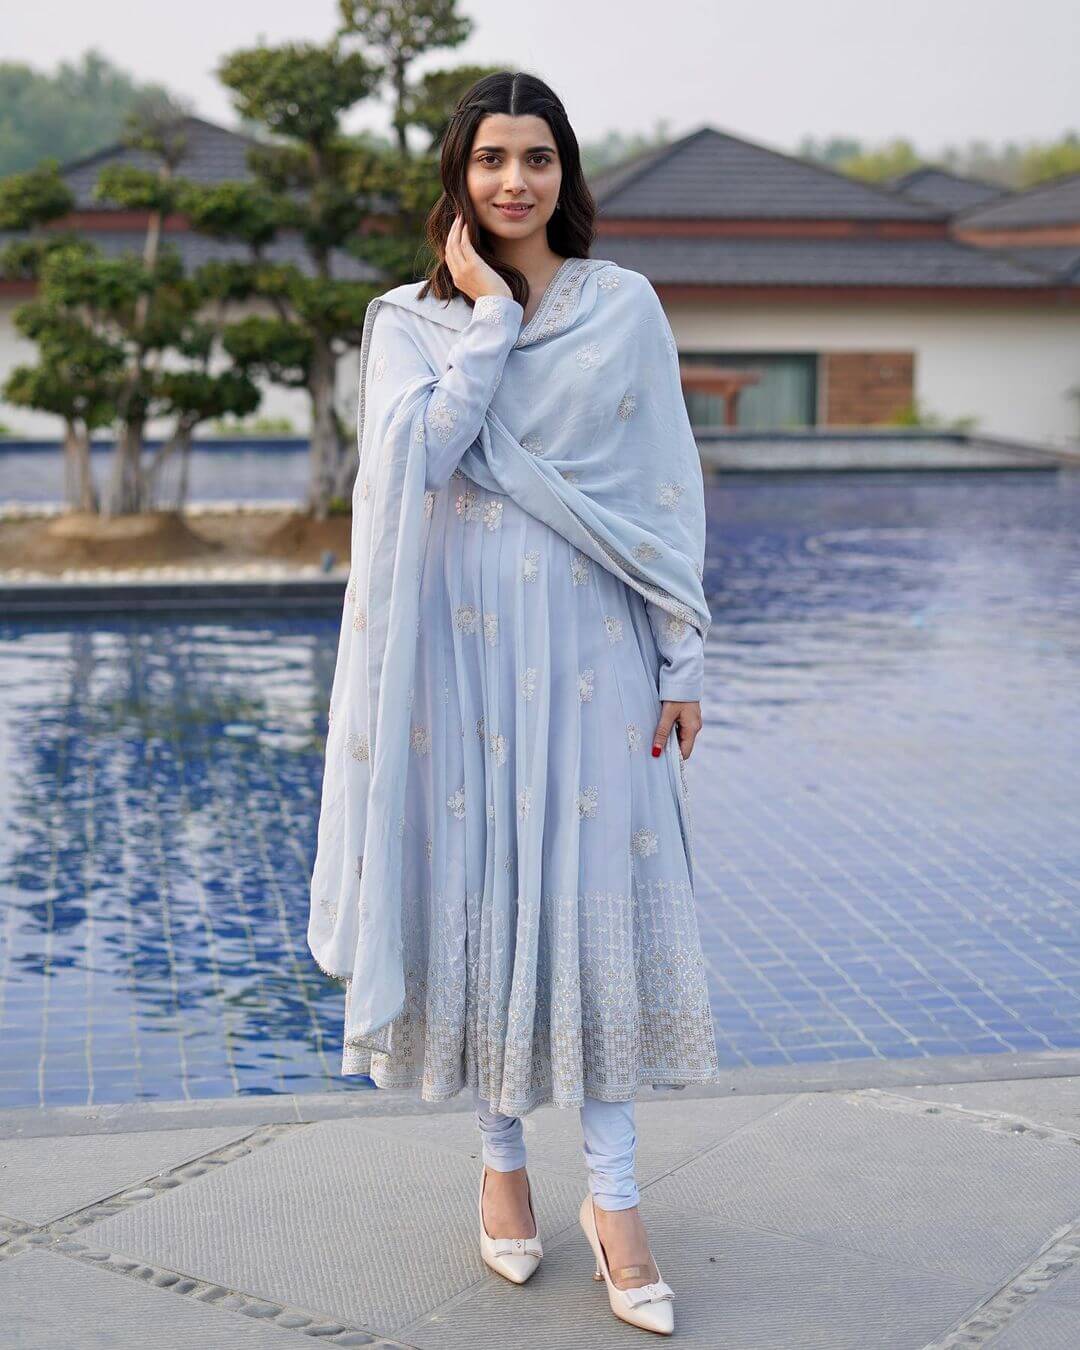 Nimrat Khaira Simple And Classy Look In Ivory Blue Anarkali Outfit Nimrat Khaira Desi And Classy Outfit